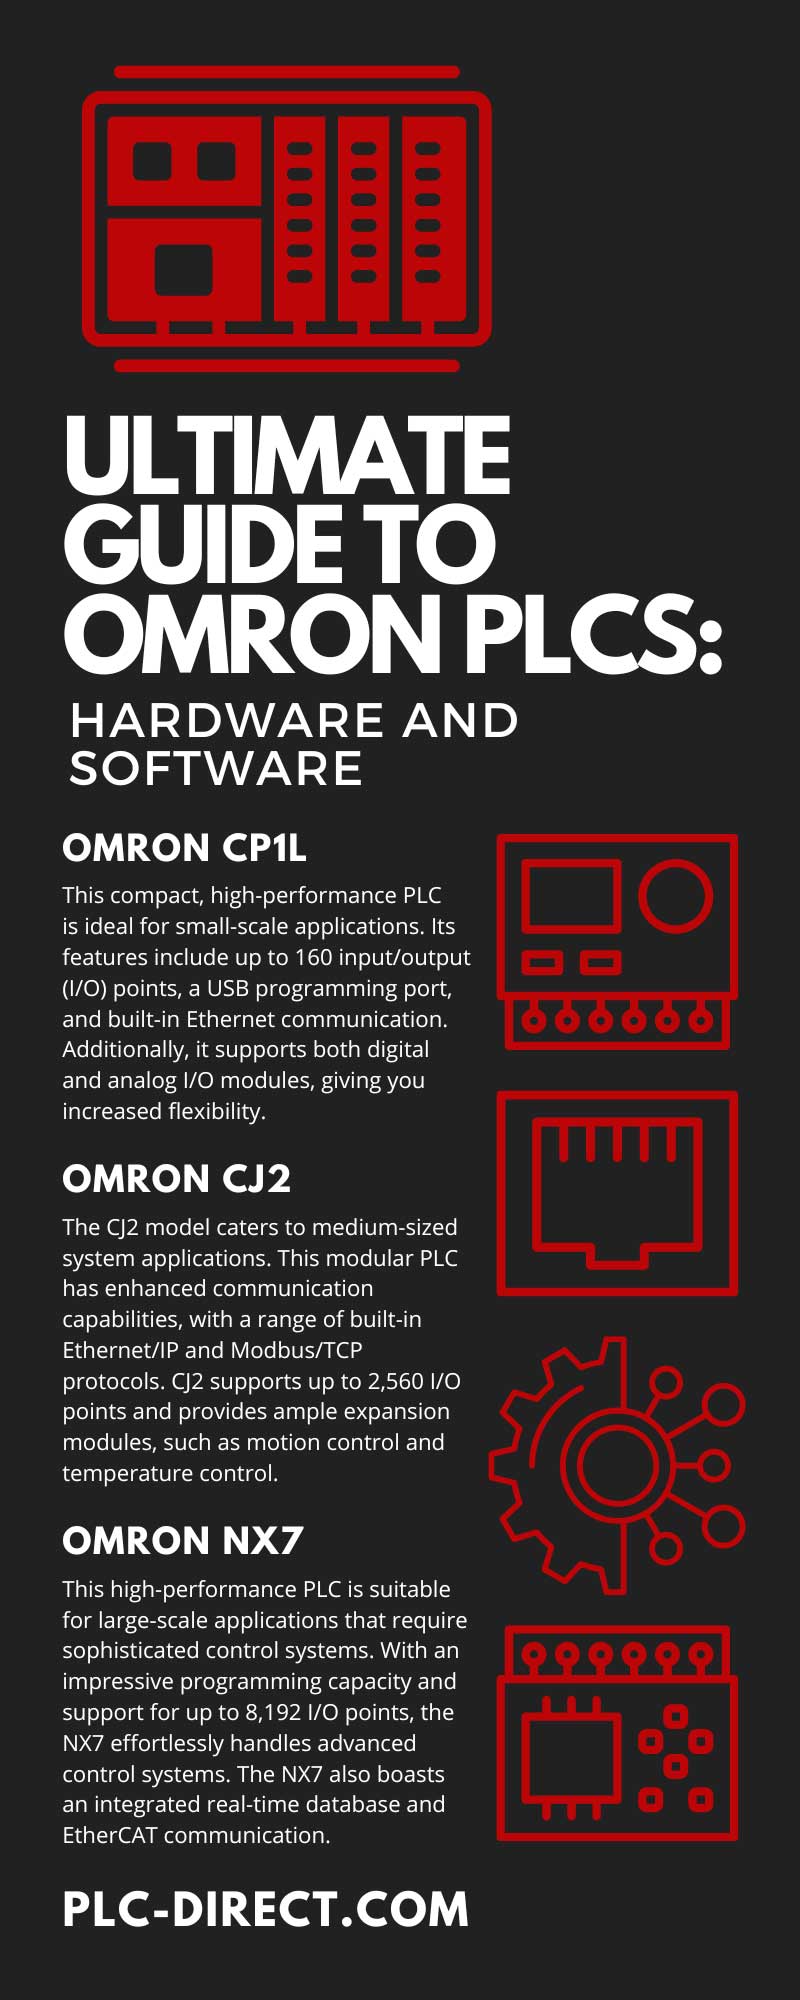 Ultimate Guide to Omron PLCs: Hardware and Software